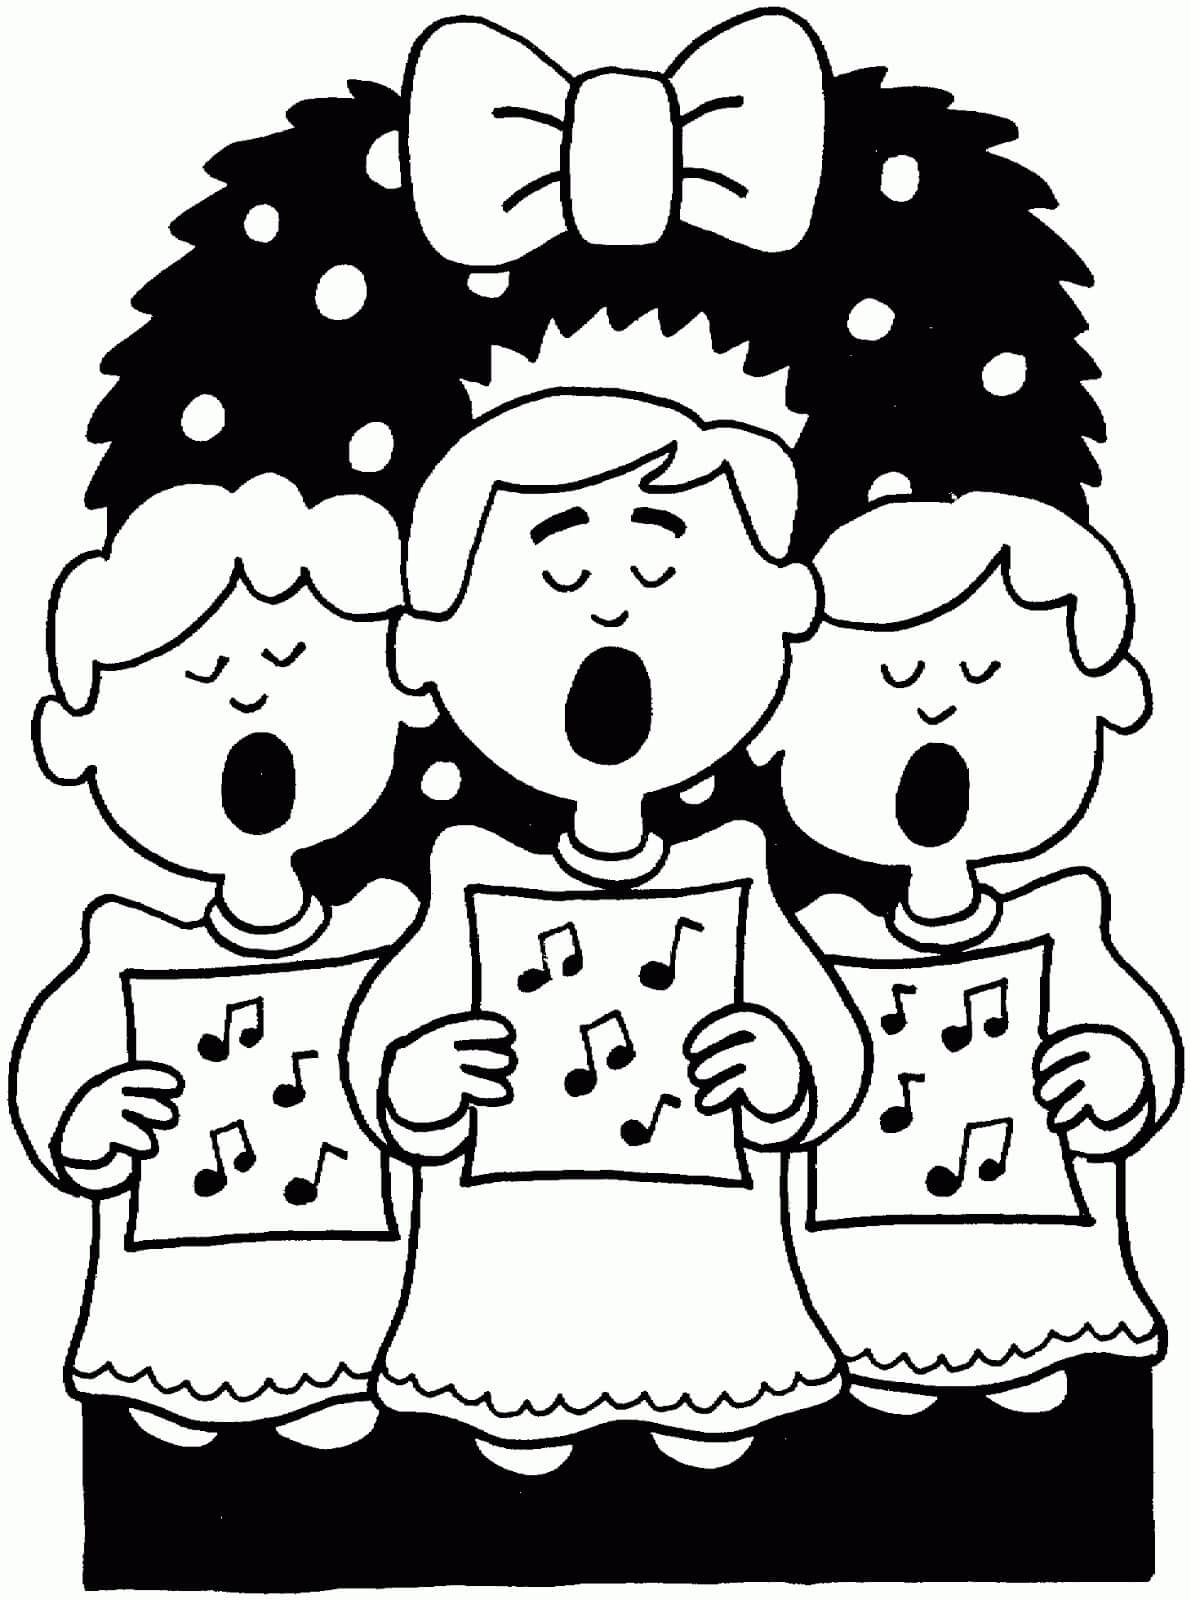 Singing the Christmas Song coloring page